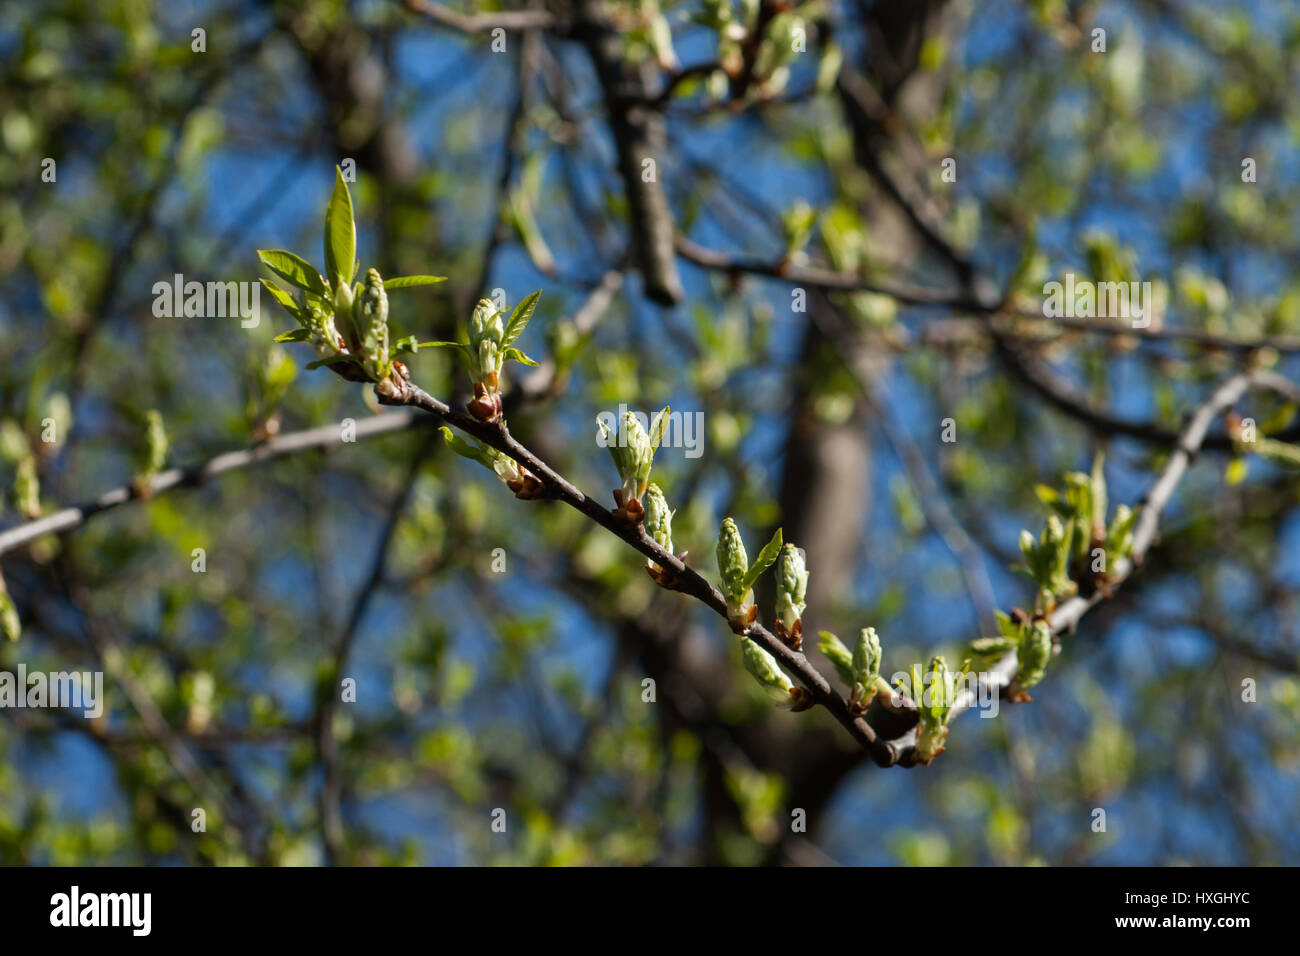 Impressions from the public parkland in Berlin-Wilmersdorf. Flowers, buds in the morning sun. Stock Photo